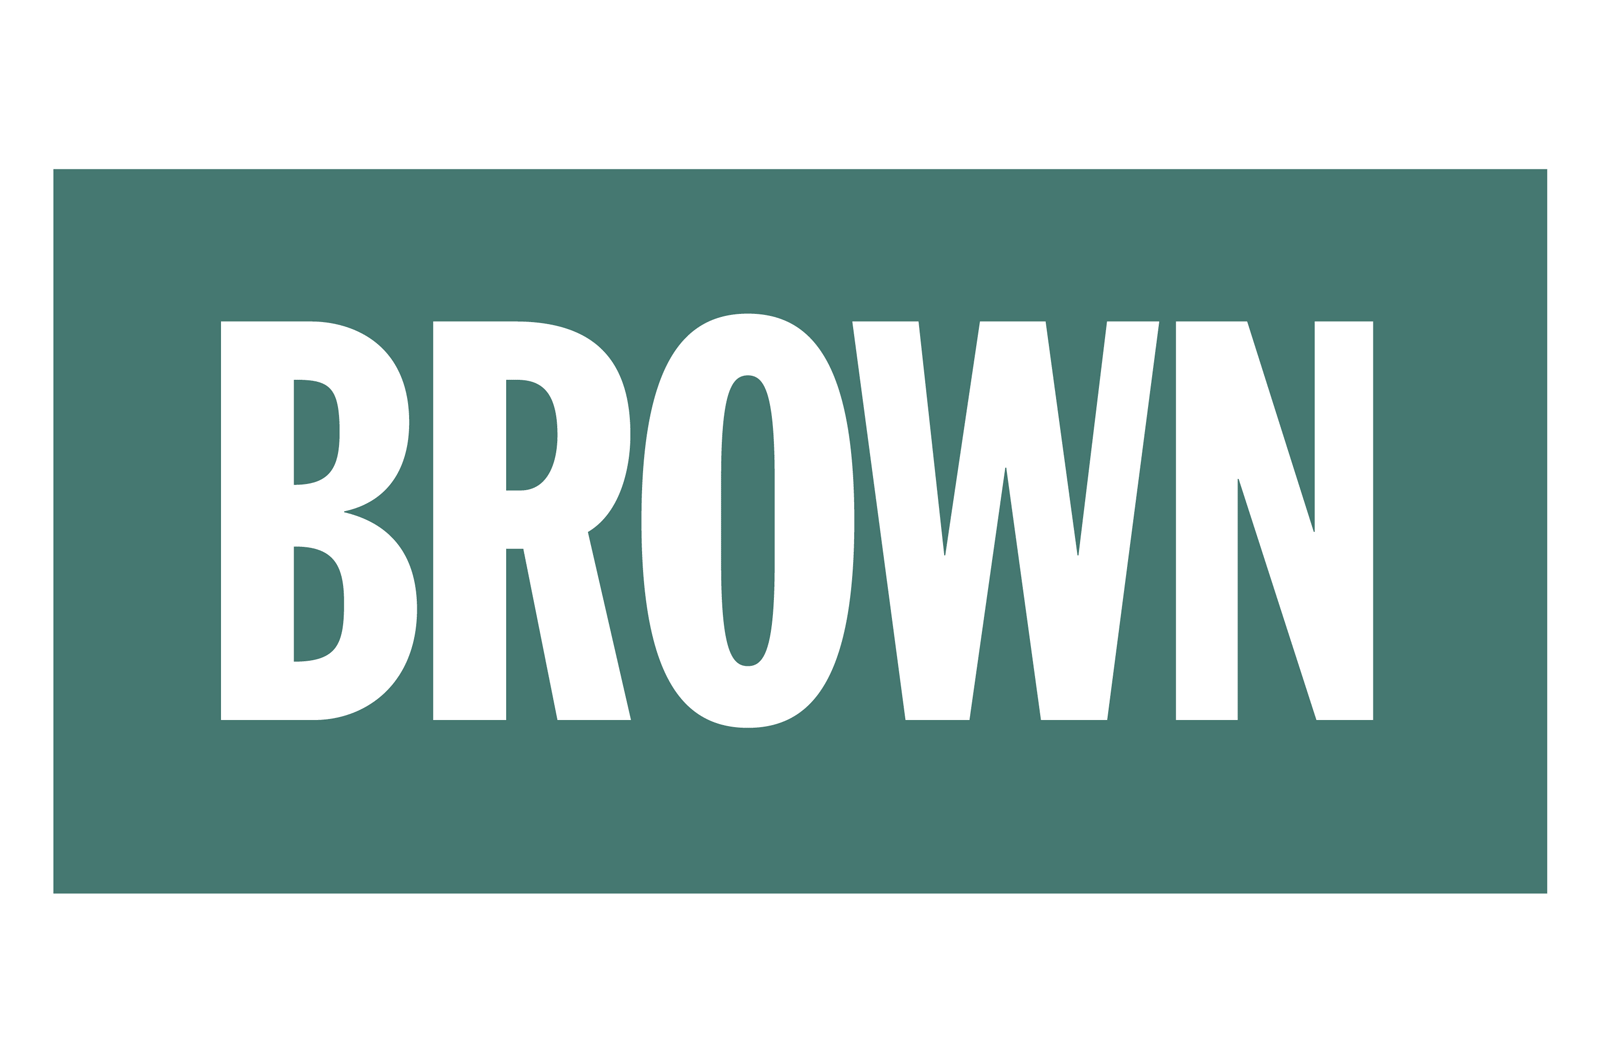 Brown Institute for Media Innovation identity and website  - MTWTF